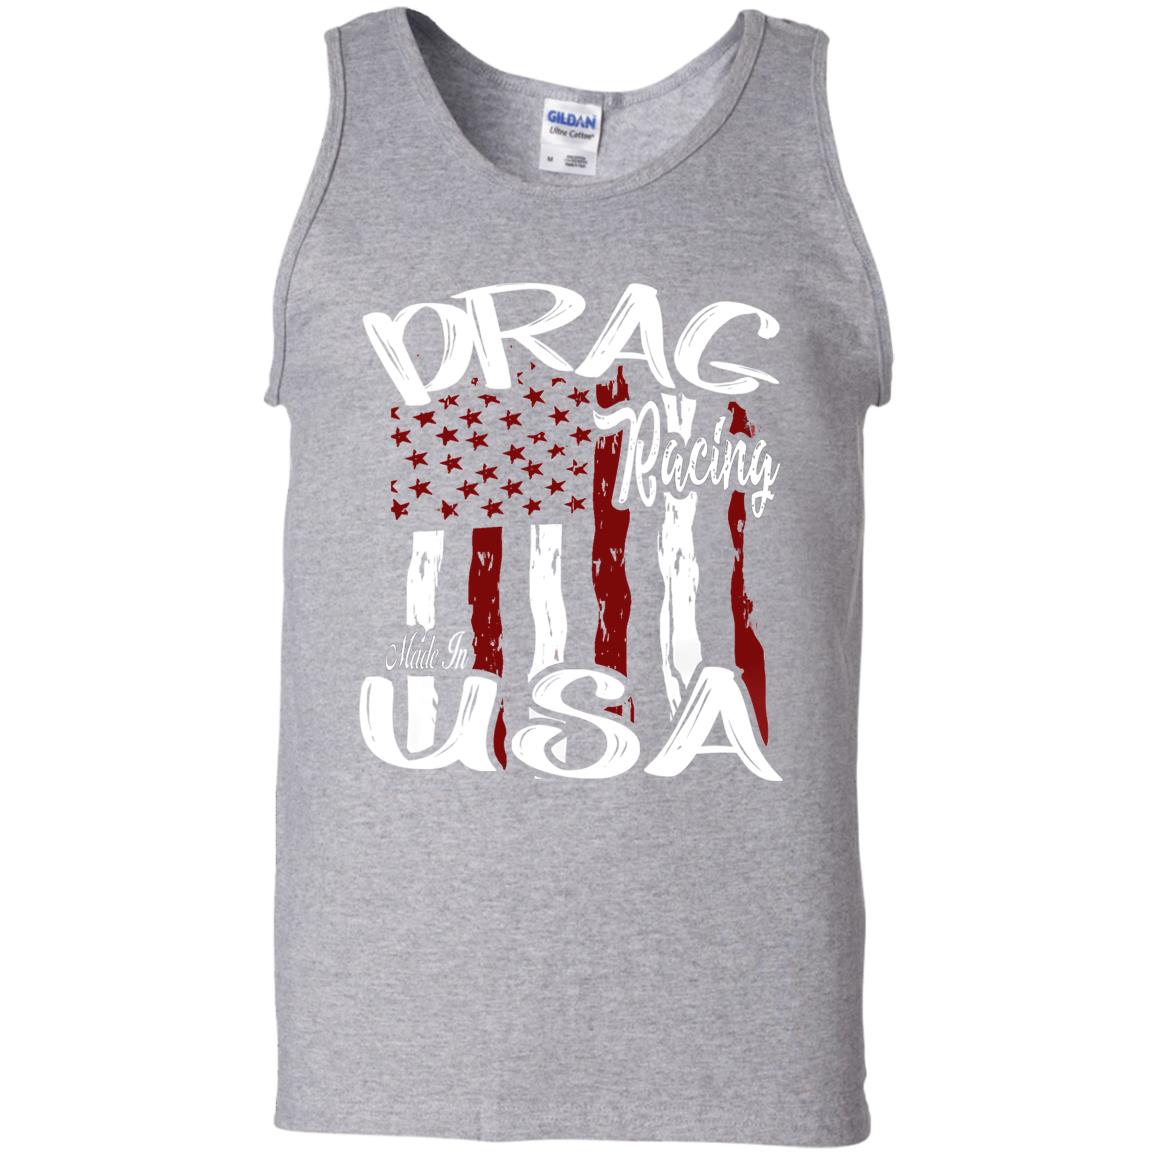 Drag Racing Made In USA 100% Cotton Tank Top